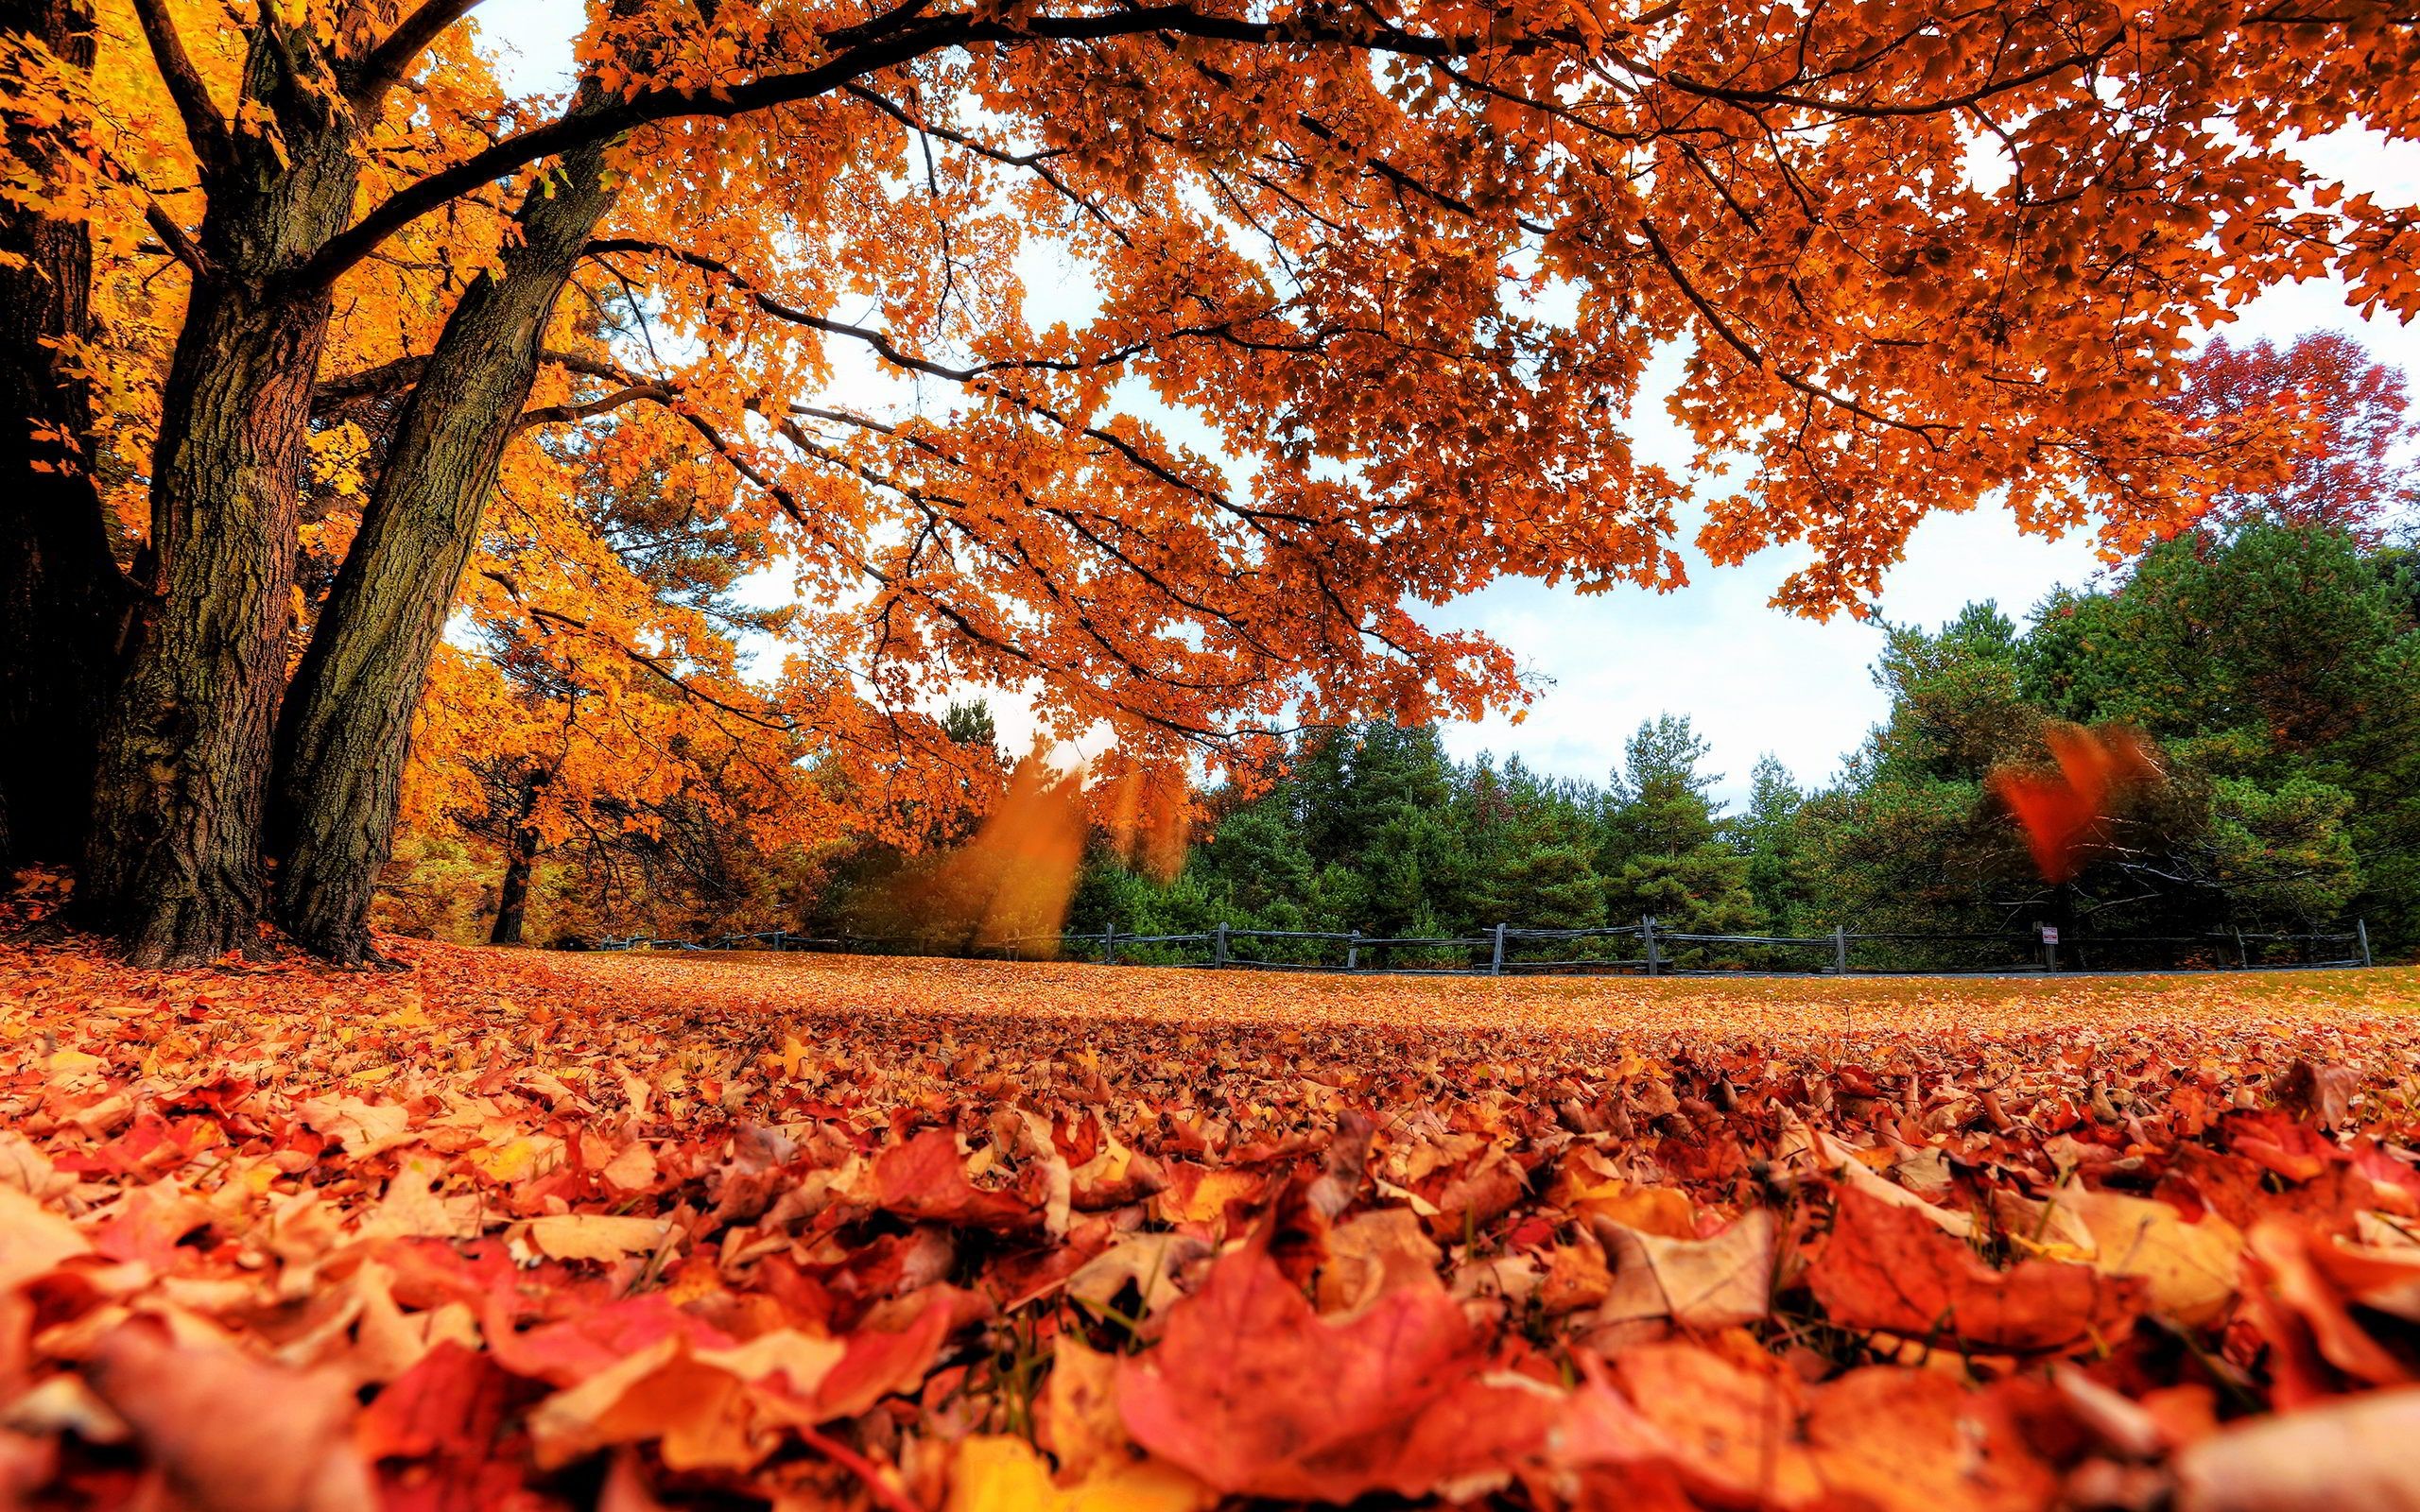 2560x1600 Download Free Fall Foliage Images.